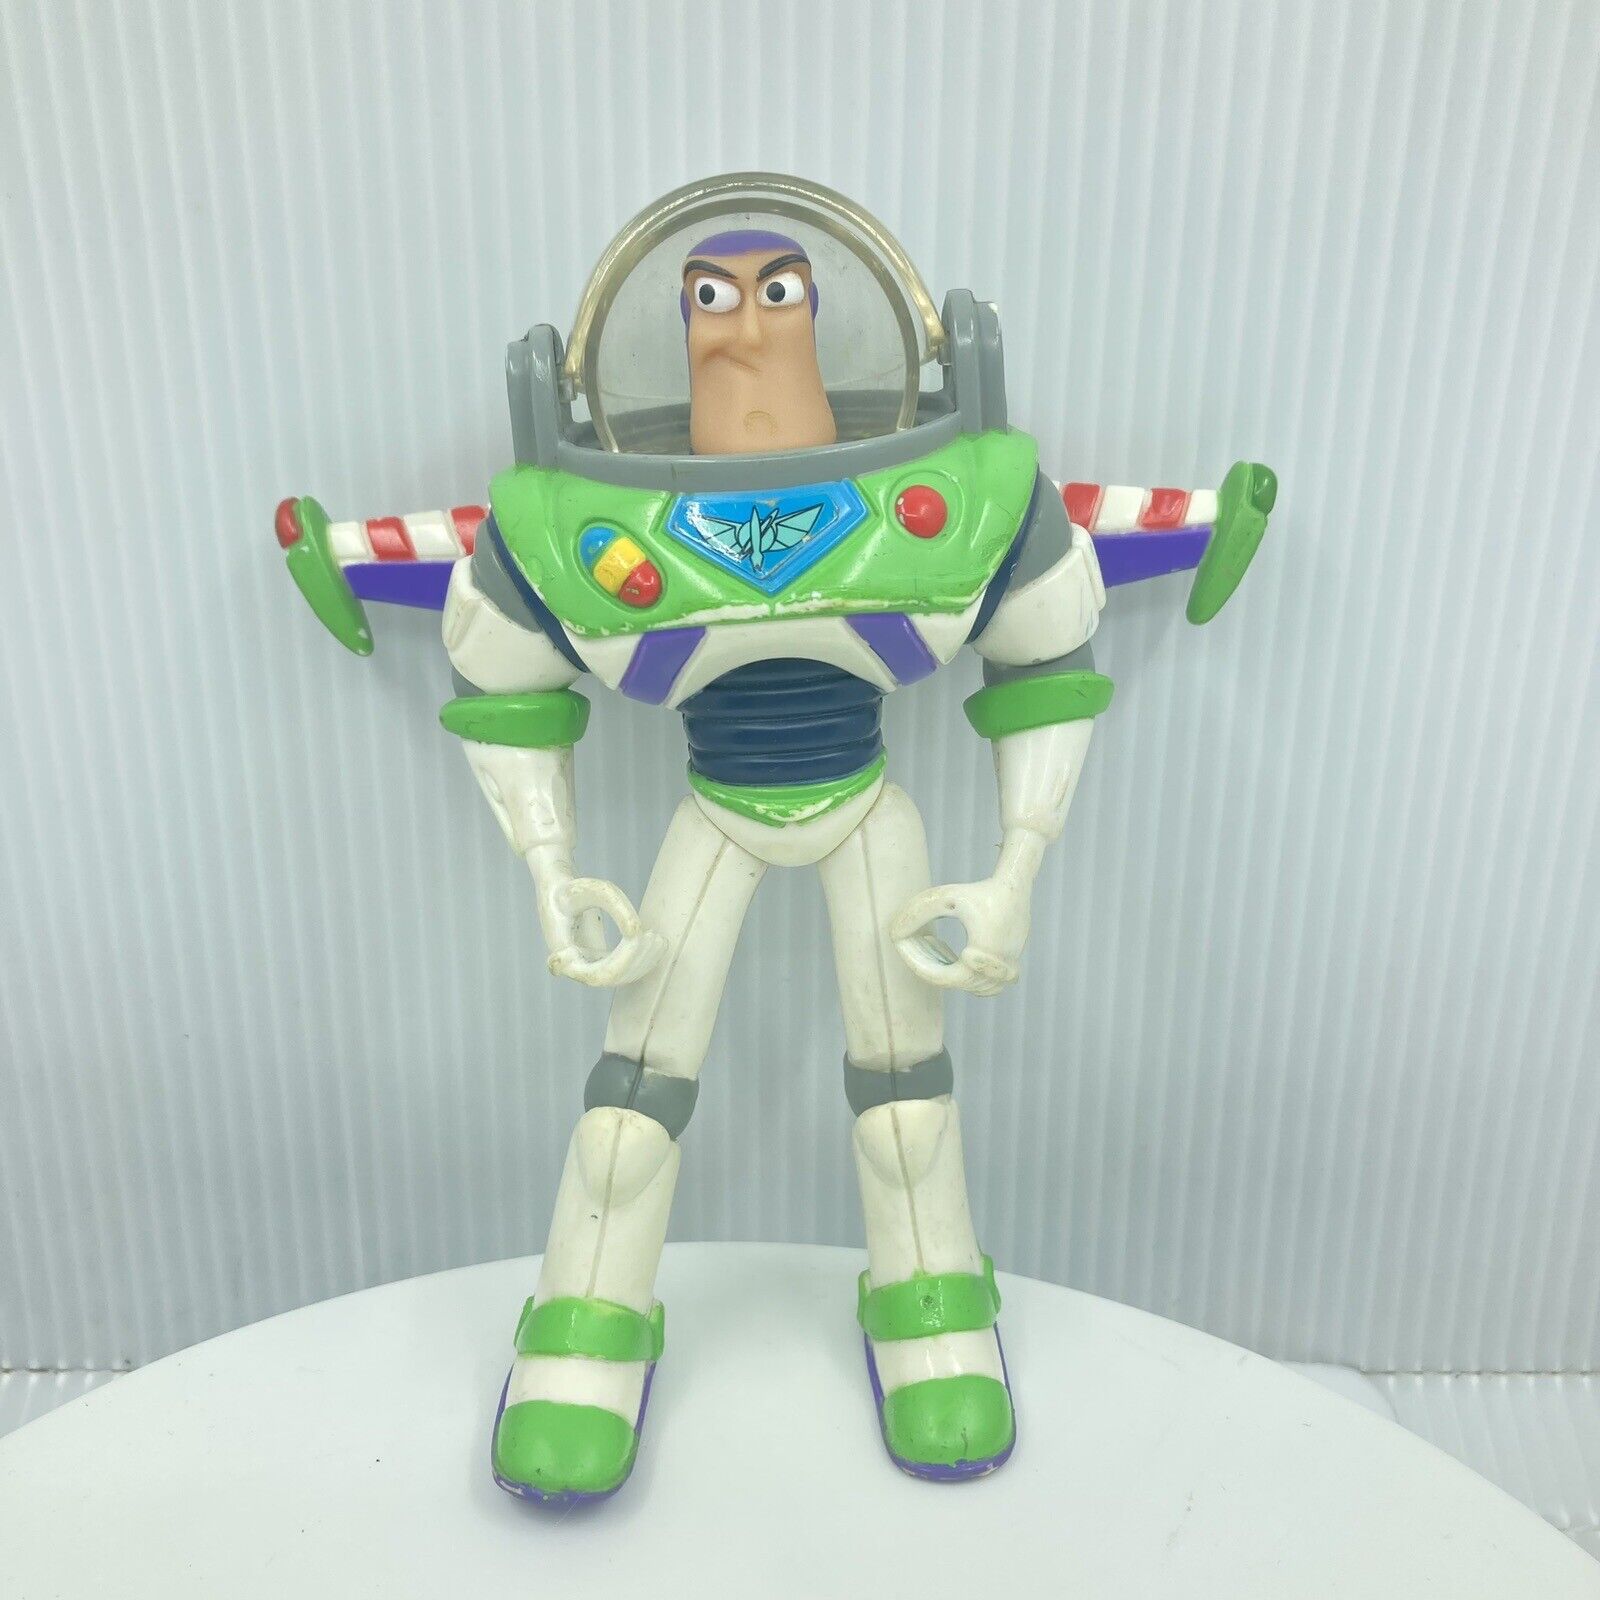 Toy Story Buzz Lightyear of Star Command Action Figure Cartoon Version 2000